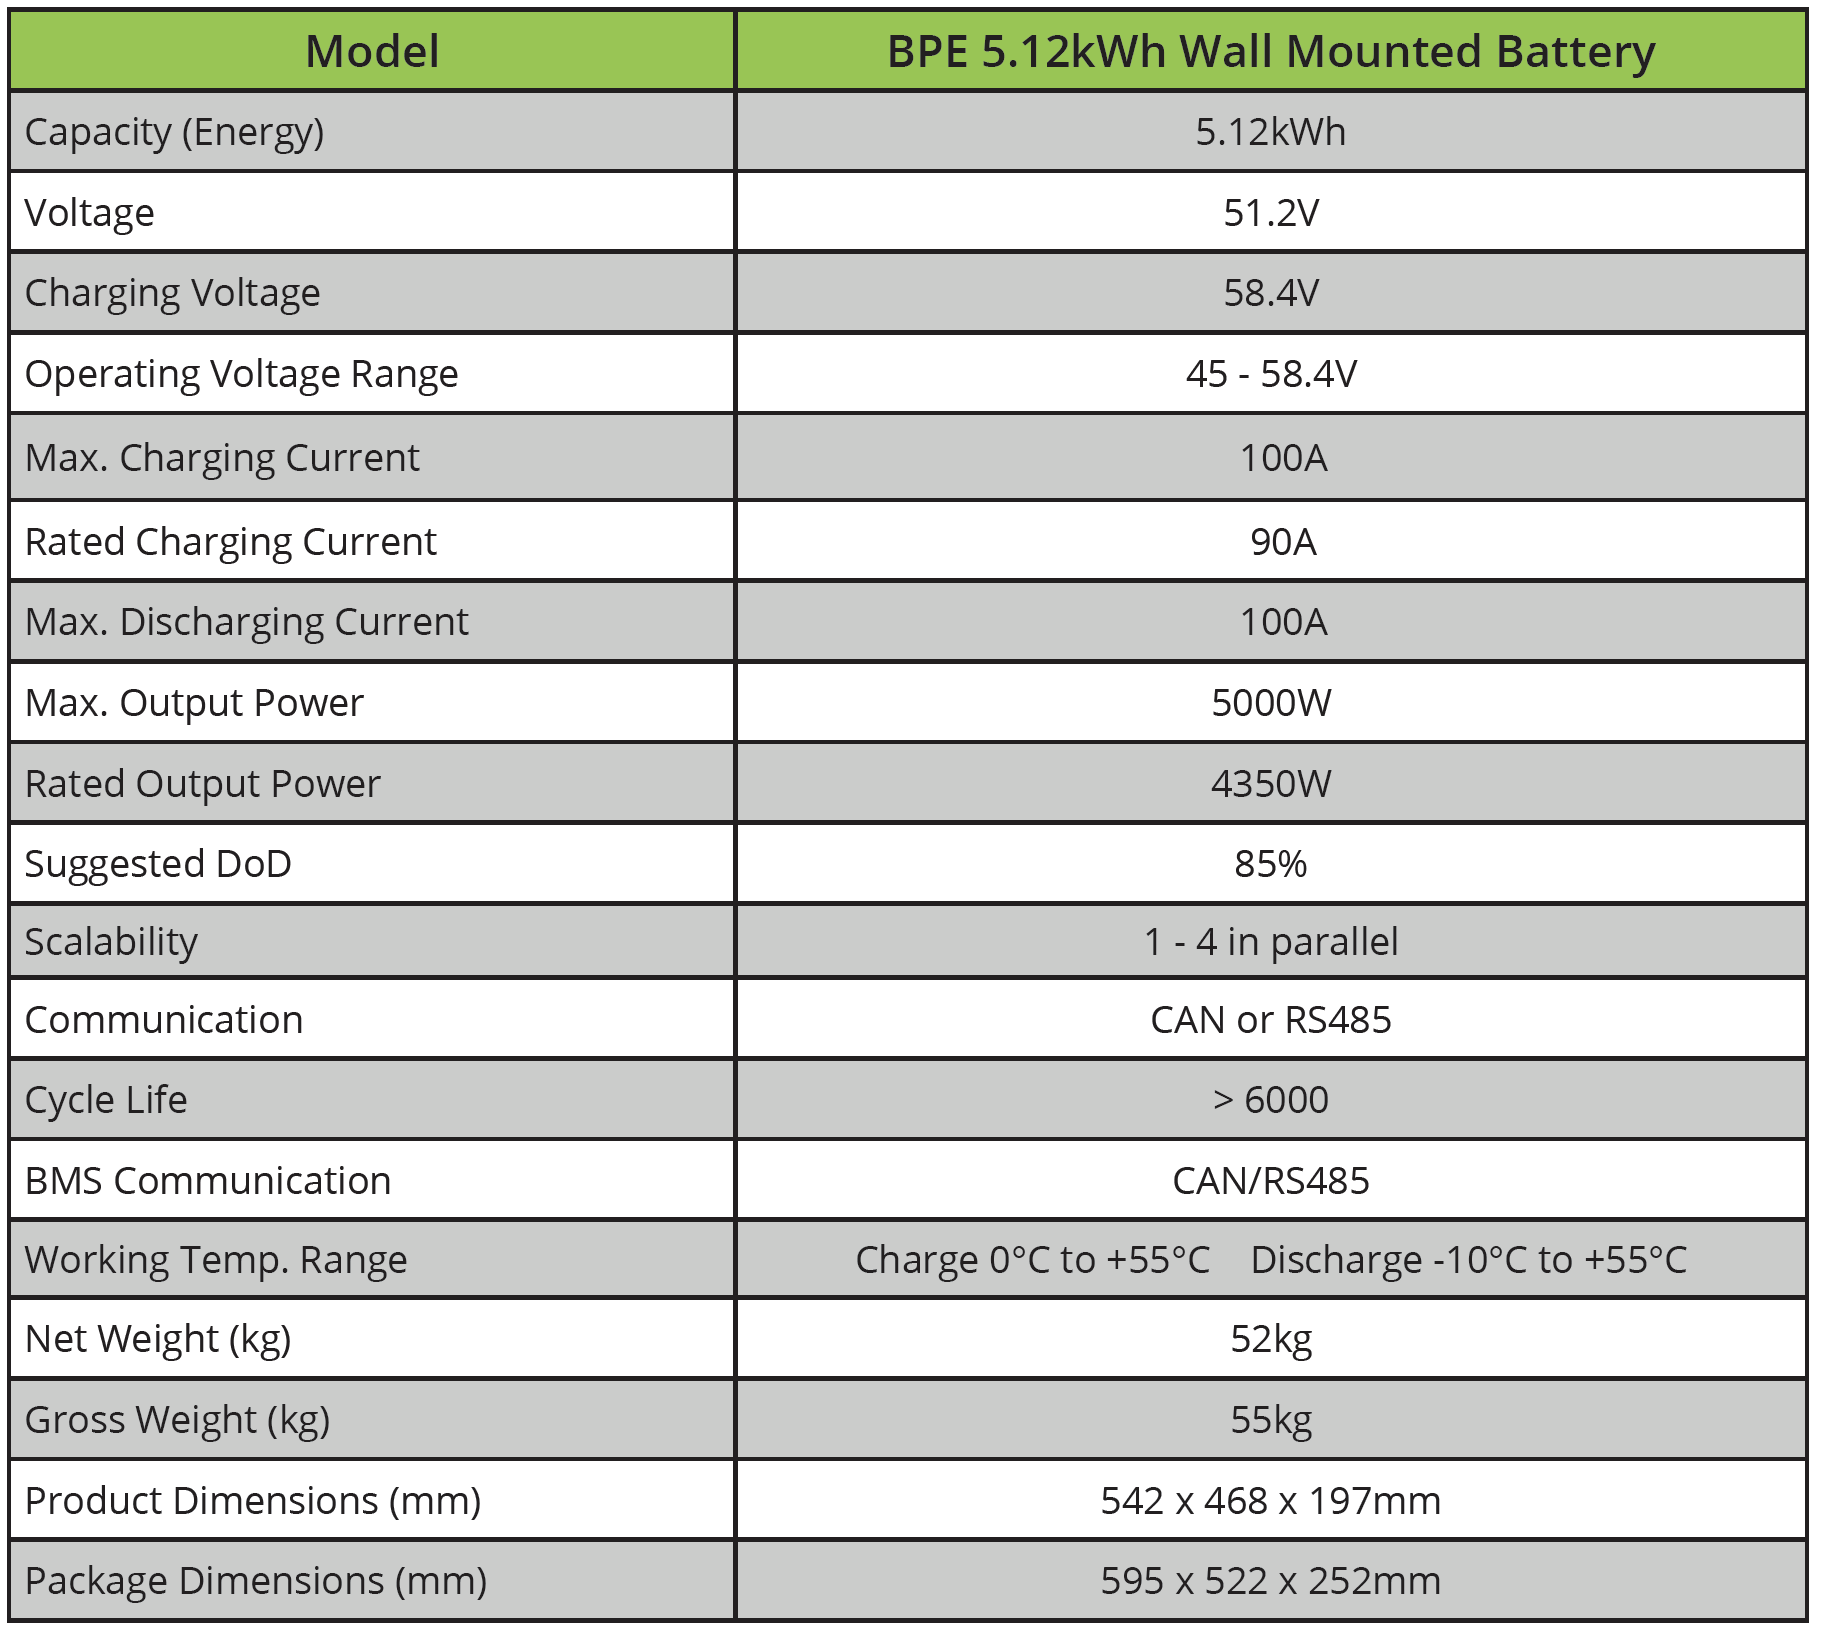 BPE PowerDepot 5.12kWh Specification